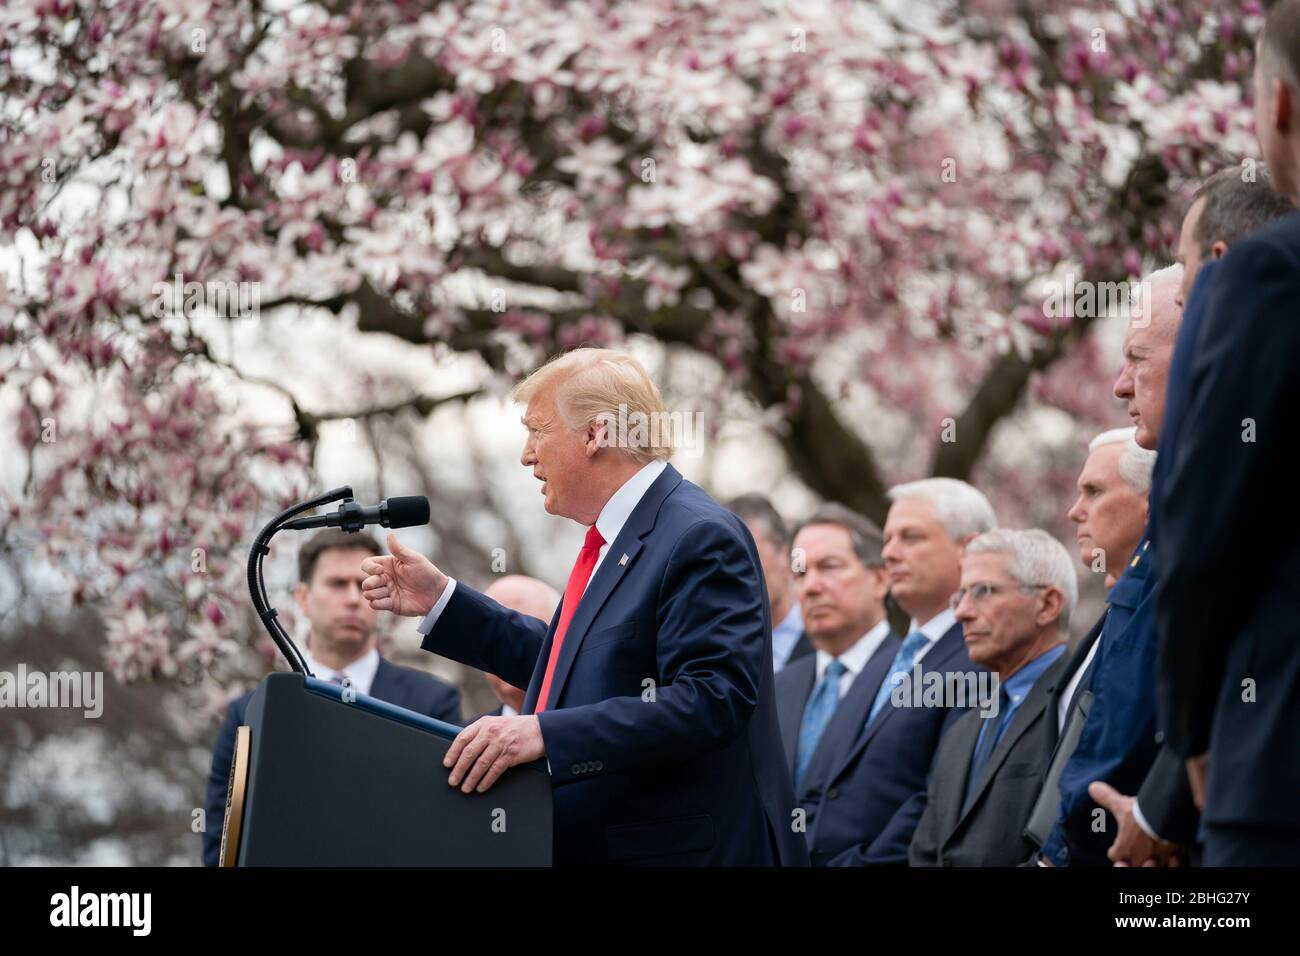 President Donald J. Trump, joined by Vice President Mike Pence and members of the White House Coronavirus Task Force, announces a national emergency to further battle the Coronavirus outbreak, at a news conference Friday, March 13, 2020, in the Rose Garden of the White House. (USA) Stock Photo